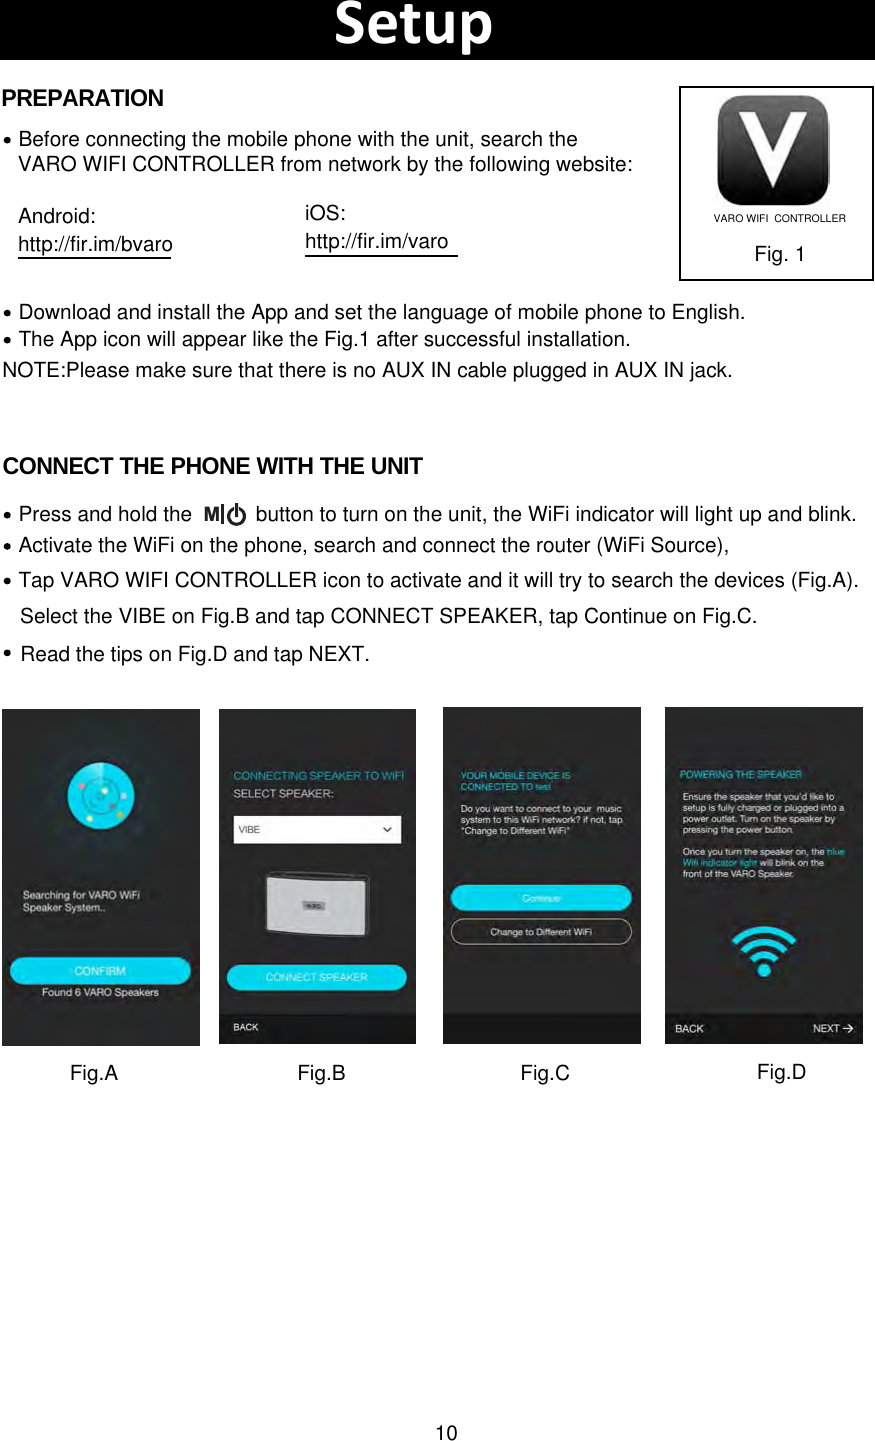 10Download and install the App and set the language of mobile phone to English.Before connecting the mobile phone with the unit, search theVARO WIFI CONTROLLER from network by the following website:The App icon will appear like the Fig.1 after successful installation.Fig. 1PREPARATIONCONNECT THE PHONE WITH THE UNITActivate the WiFi on the phone, search and connect the router (WiFi Source),  Press and hold the           button to turn on the unit, the WiFi indicator will light up and blink. Tap VARO WIFI CONTROLLER icon to activate and it will try to search the devices (Fig.A).SetupVARO WIFI  CONTROLLERNOTE:Please make sure that there is no AUX IN cable plugged in AUX IN jack.MAndroid:http://fir.im/bvaroiOS:http://fir.im/varoFig.A Fig.BSelect the VIBE on Fig.B and tap CONNECT SPEAKER, tap Continue on Fig.C. Fig.C Fig.DRead the tips on Fig.D and tap NEXT.